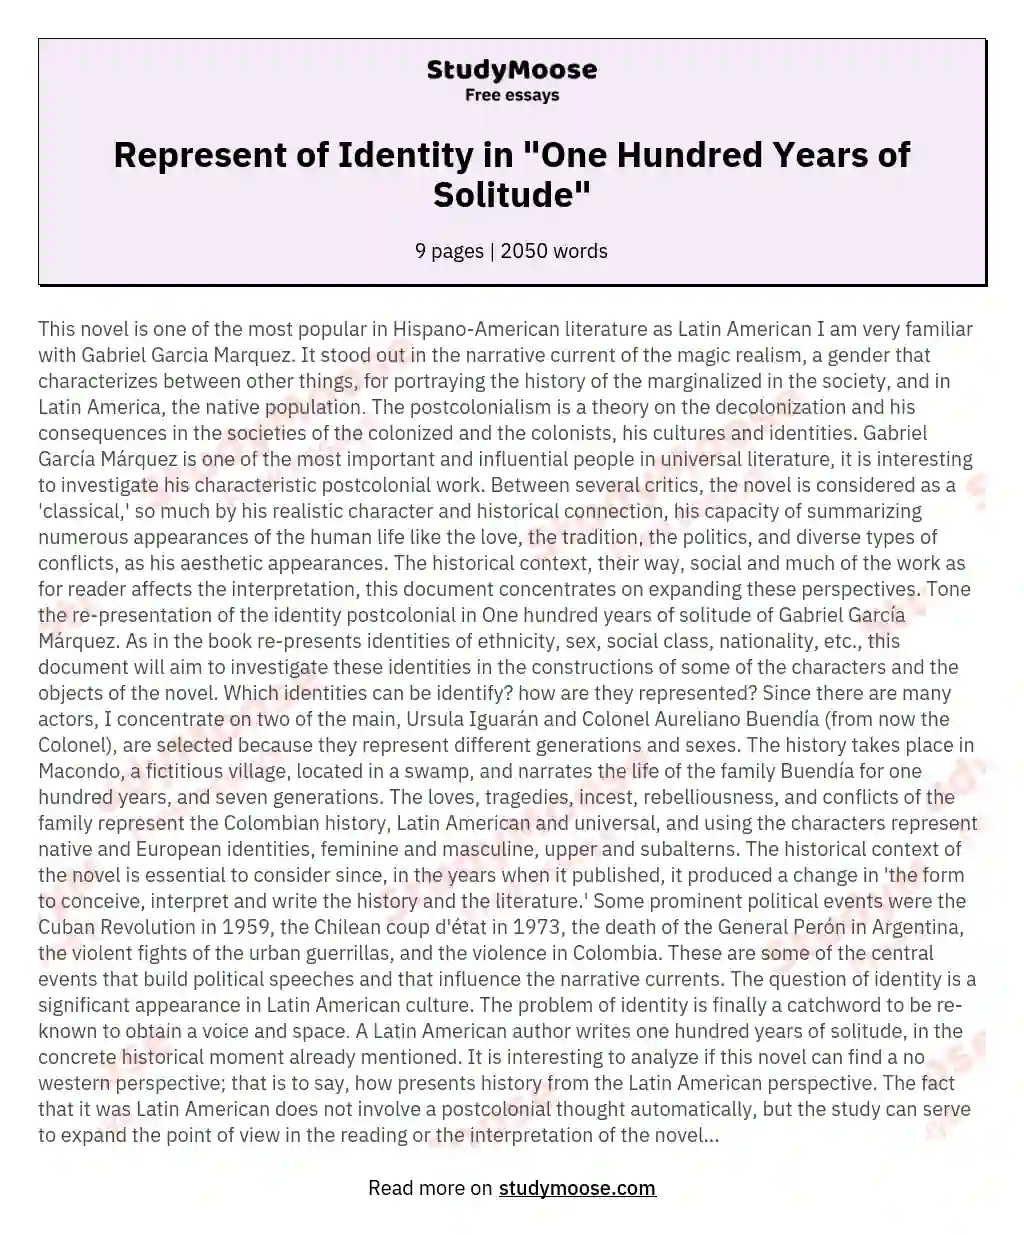 Represent of Identity in "One Hundred Years of Solitude"